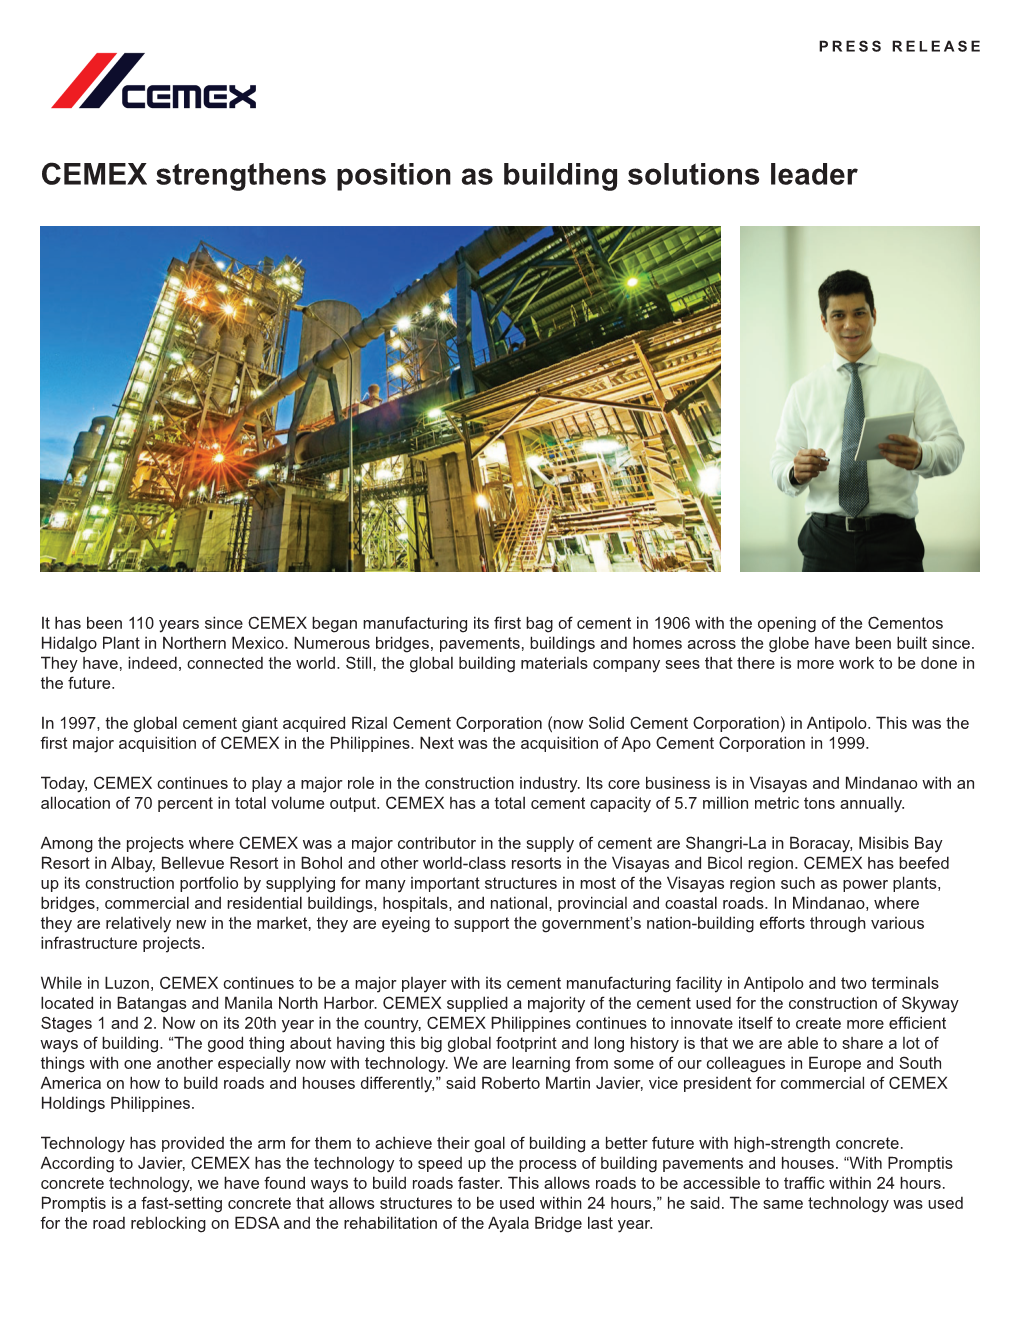 CEMEX Strengthens Position As Building Solutions Leader